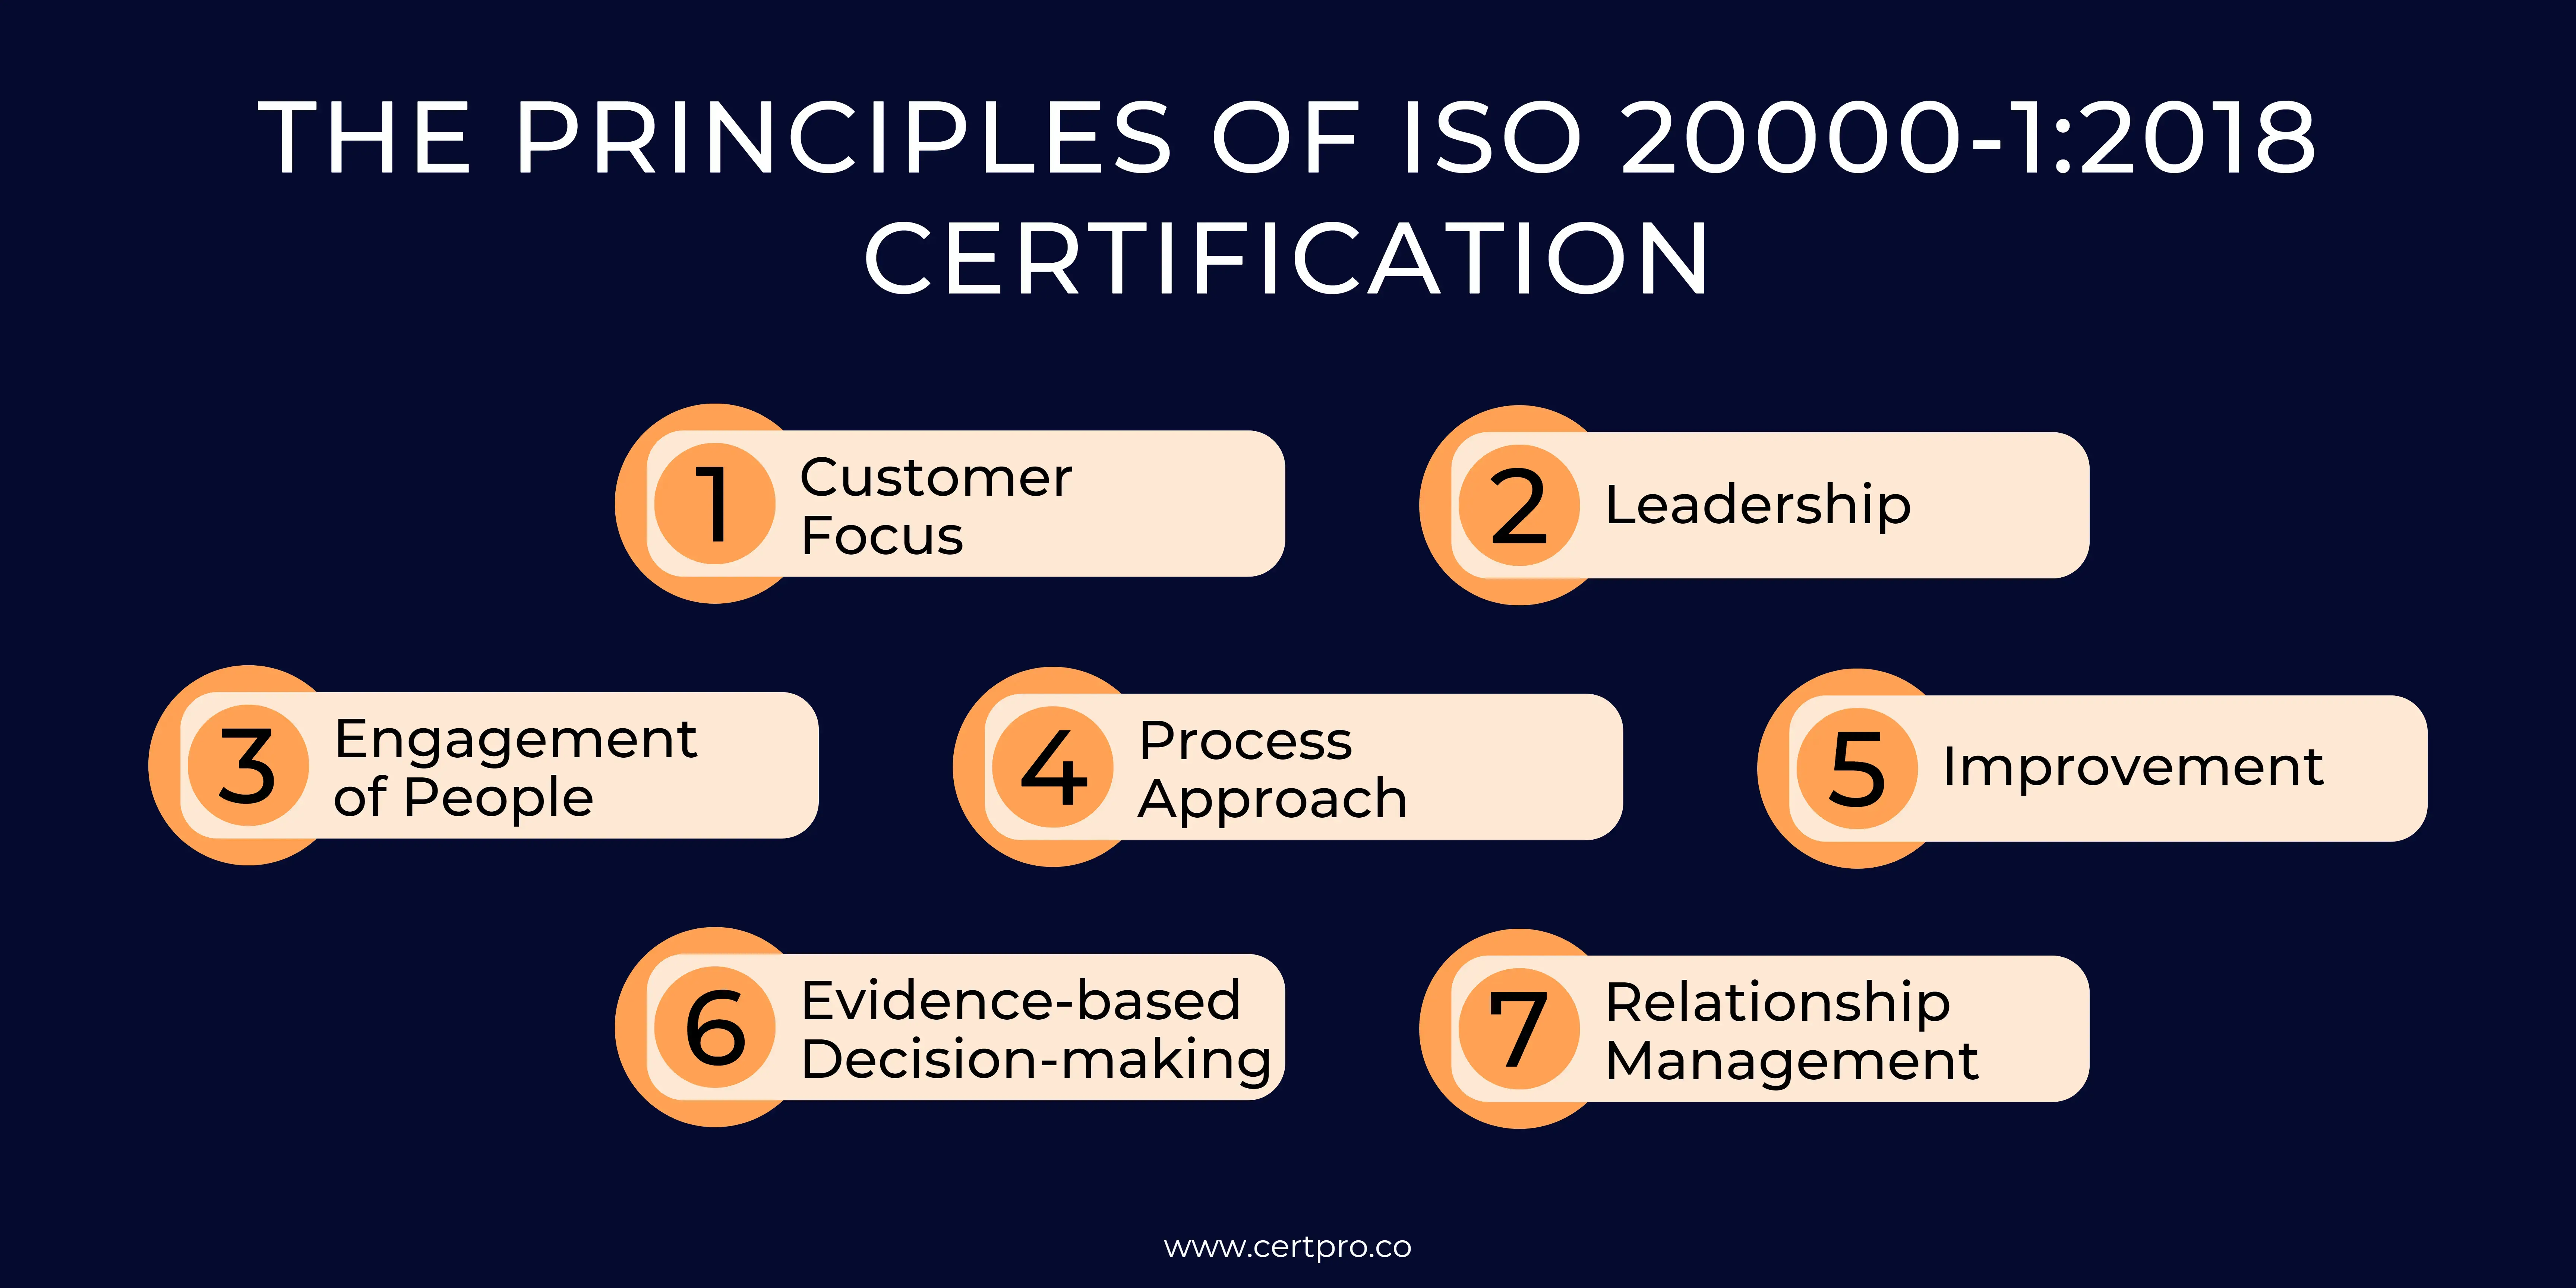 PRINCIPLES OF ISO 20000-1-2018